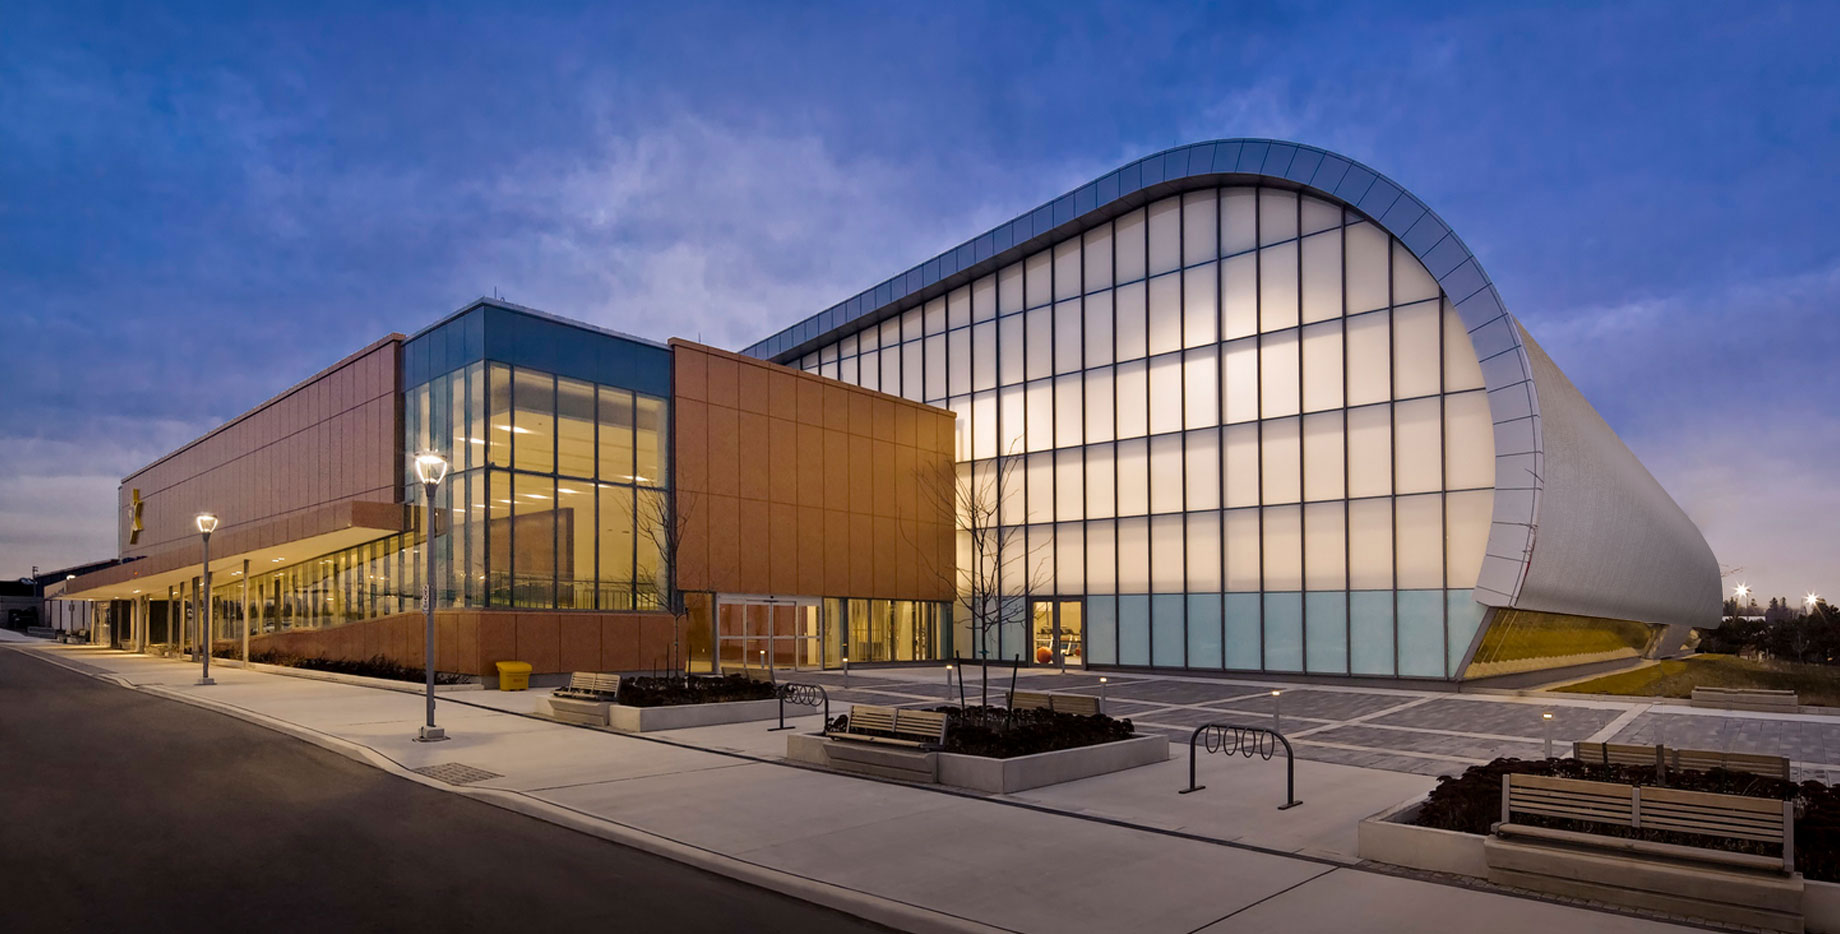 Exterior view of the Abilities Centre facility